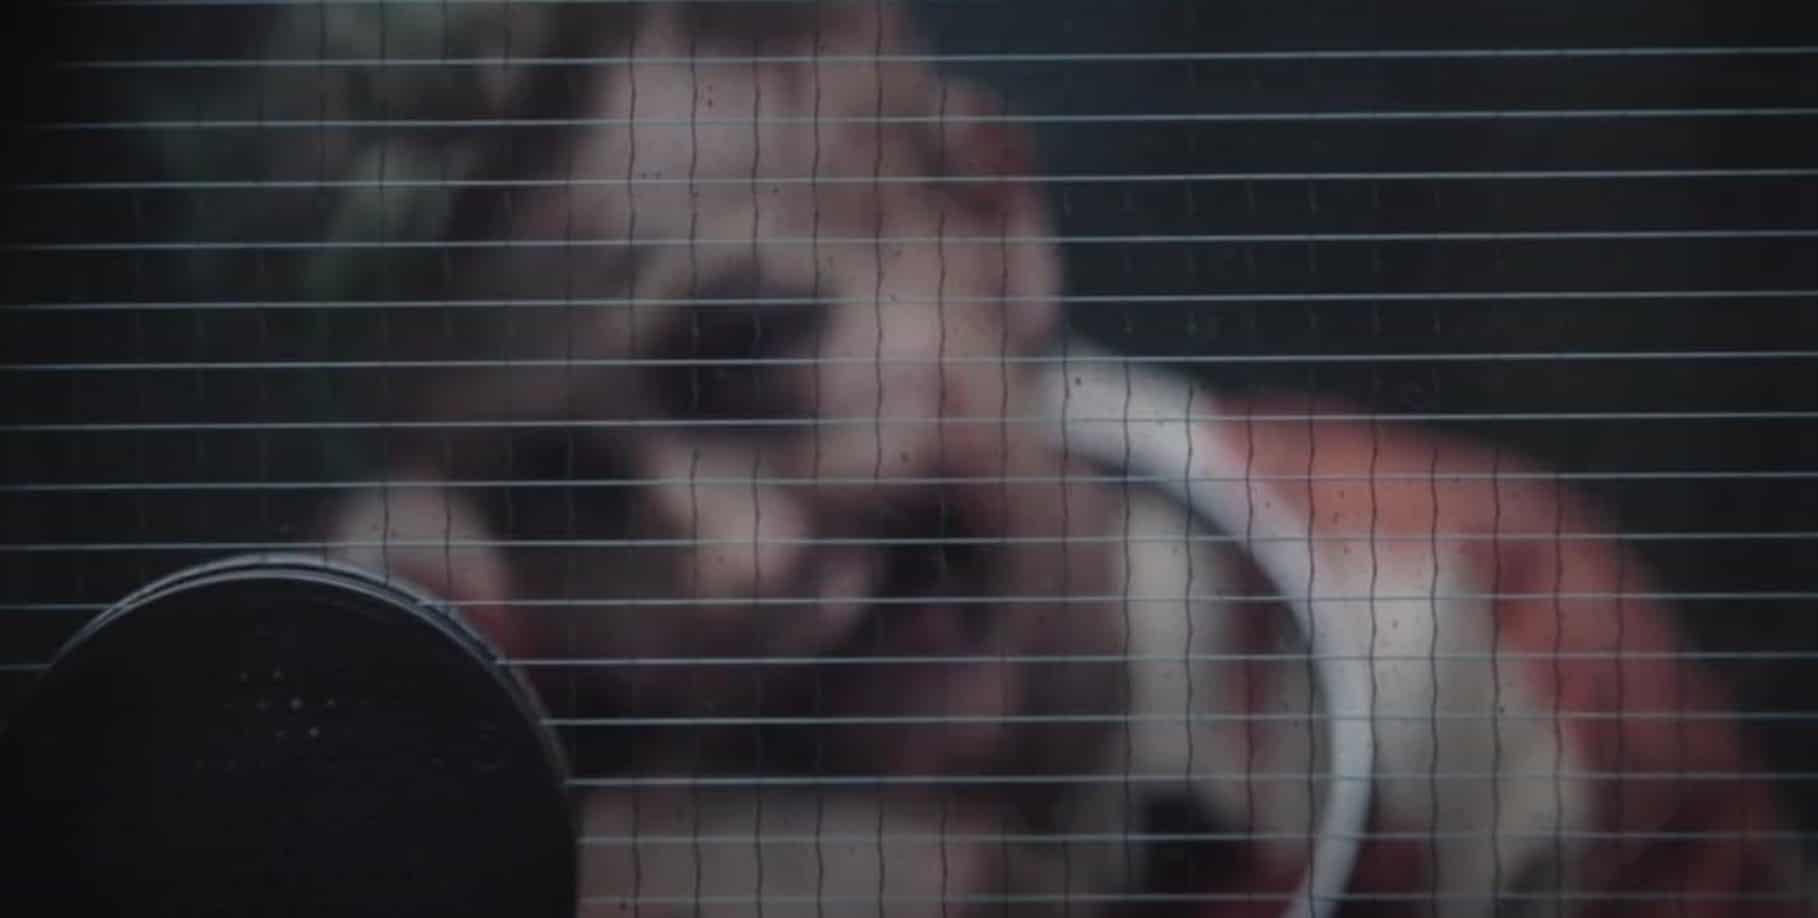 A scarred man is seen behind prison glass in this image from Warner Bros. Pictures.